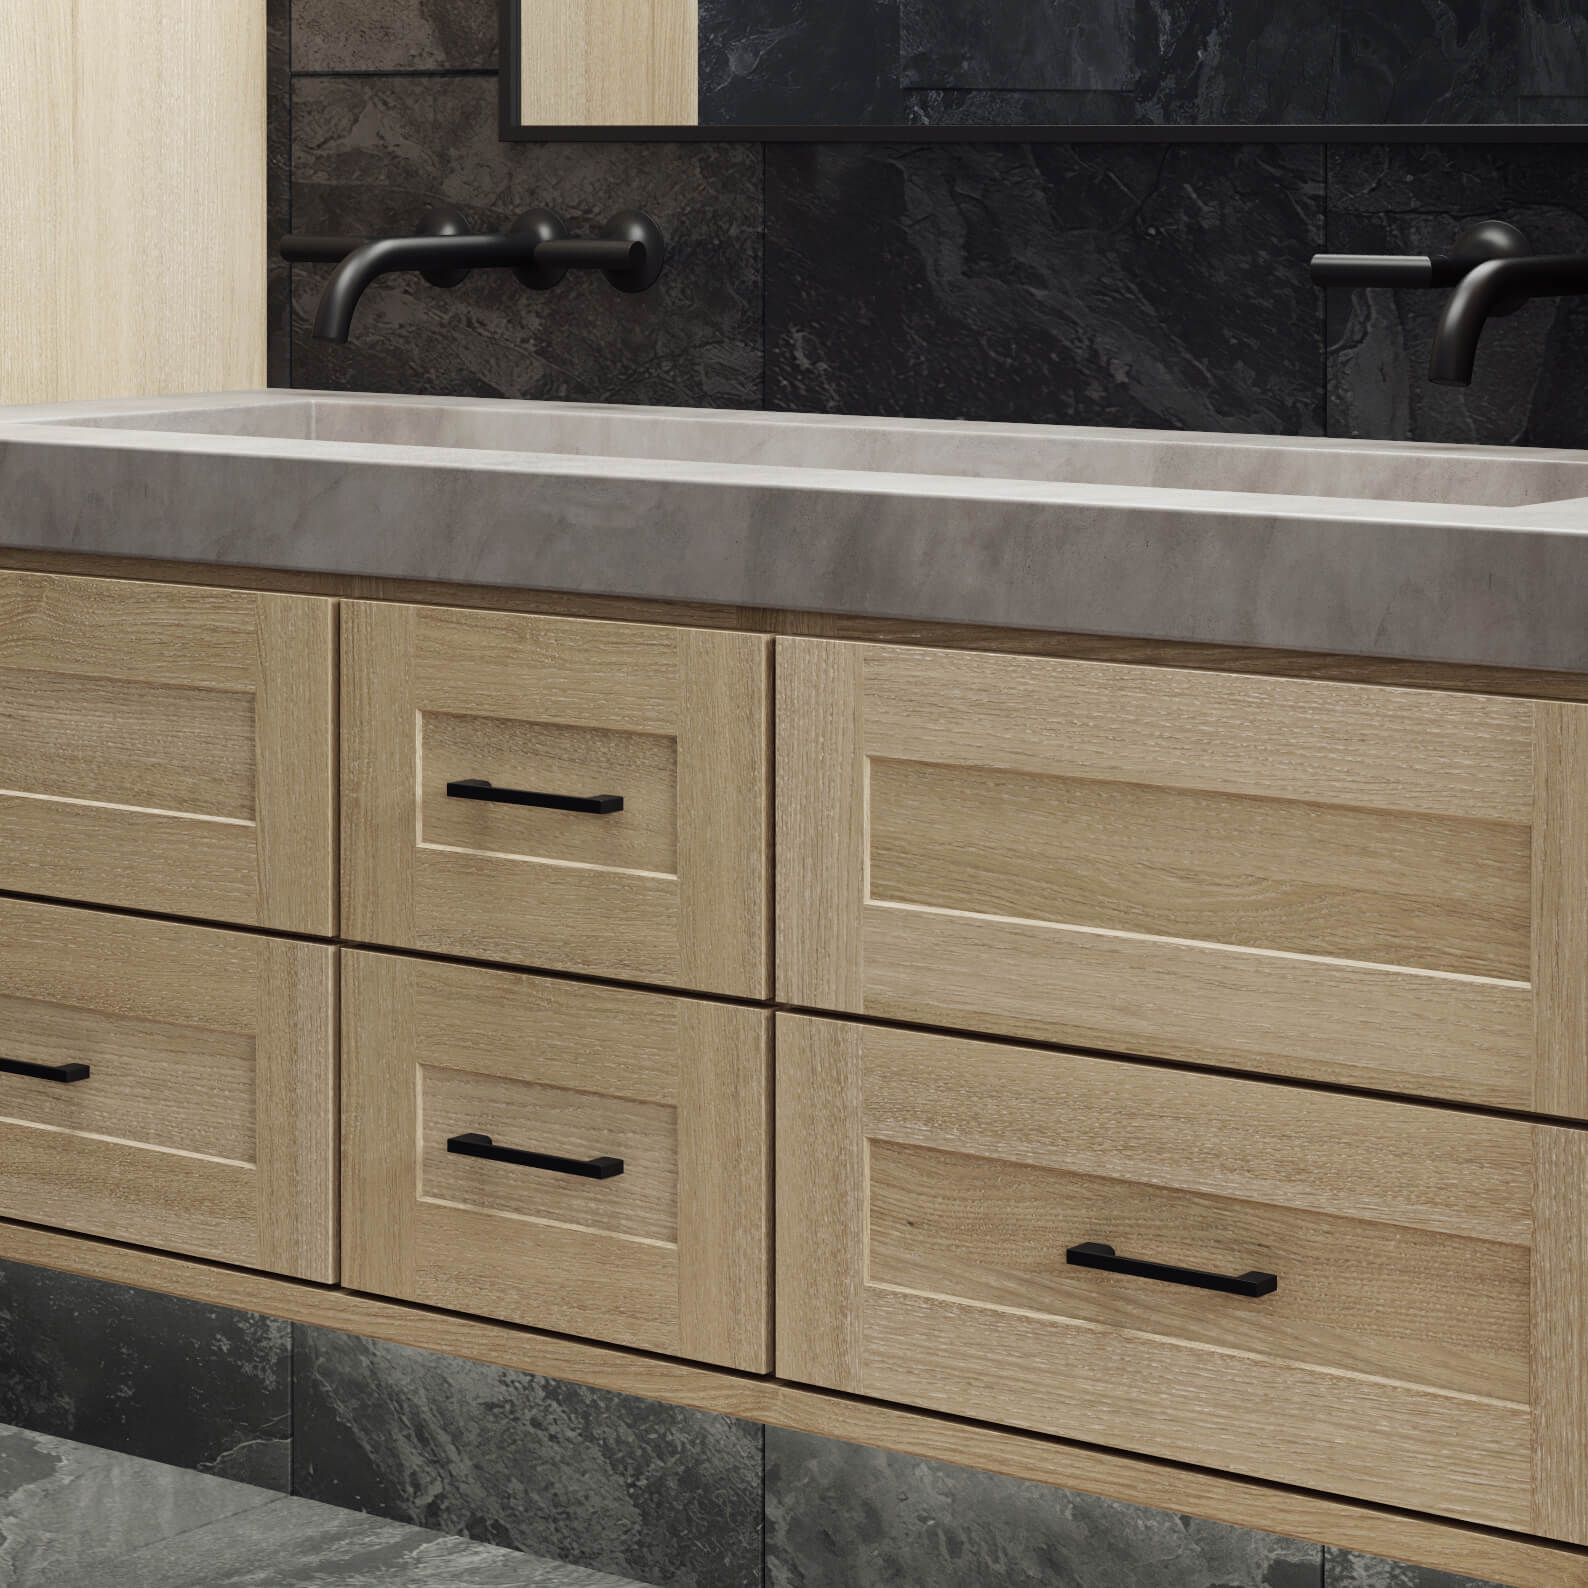 Shallow shaker cabinet doors on a floating wall-hung vanity.